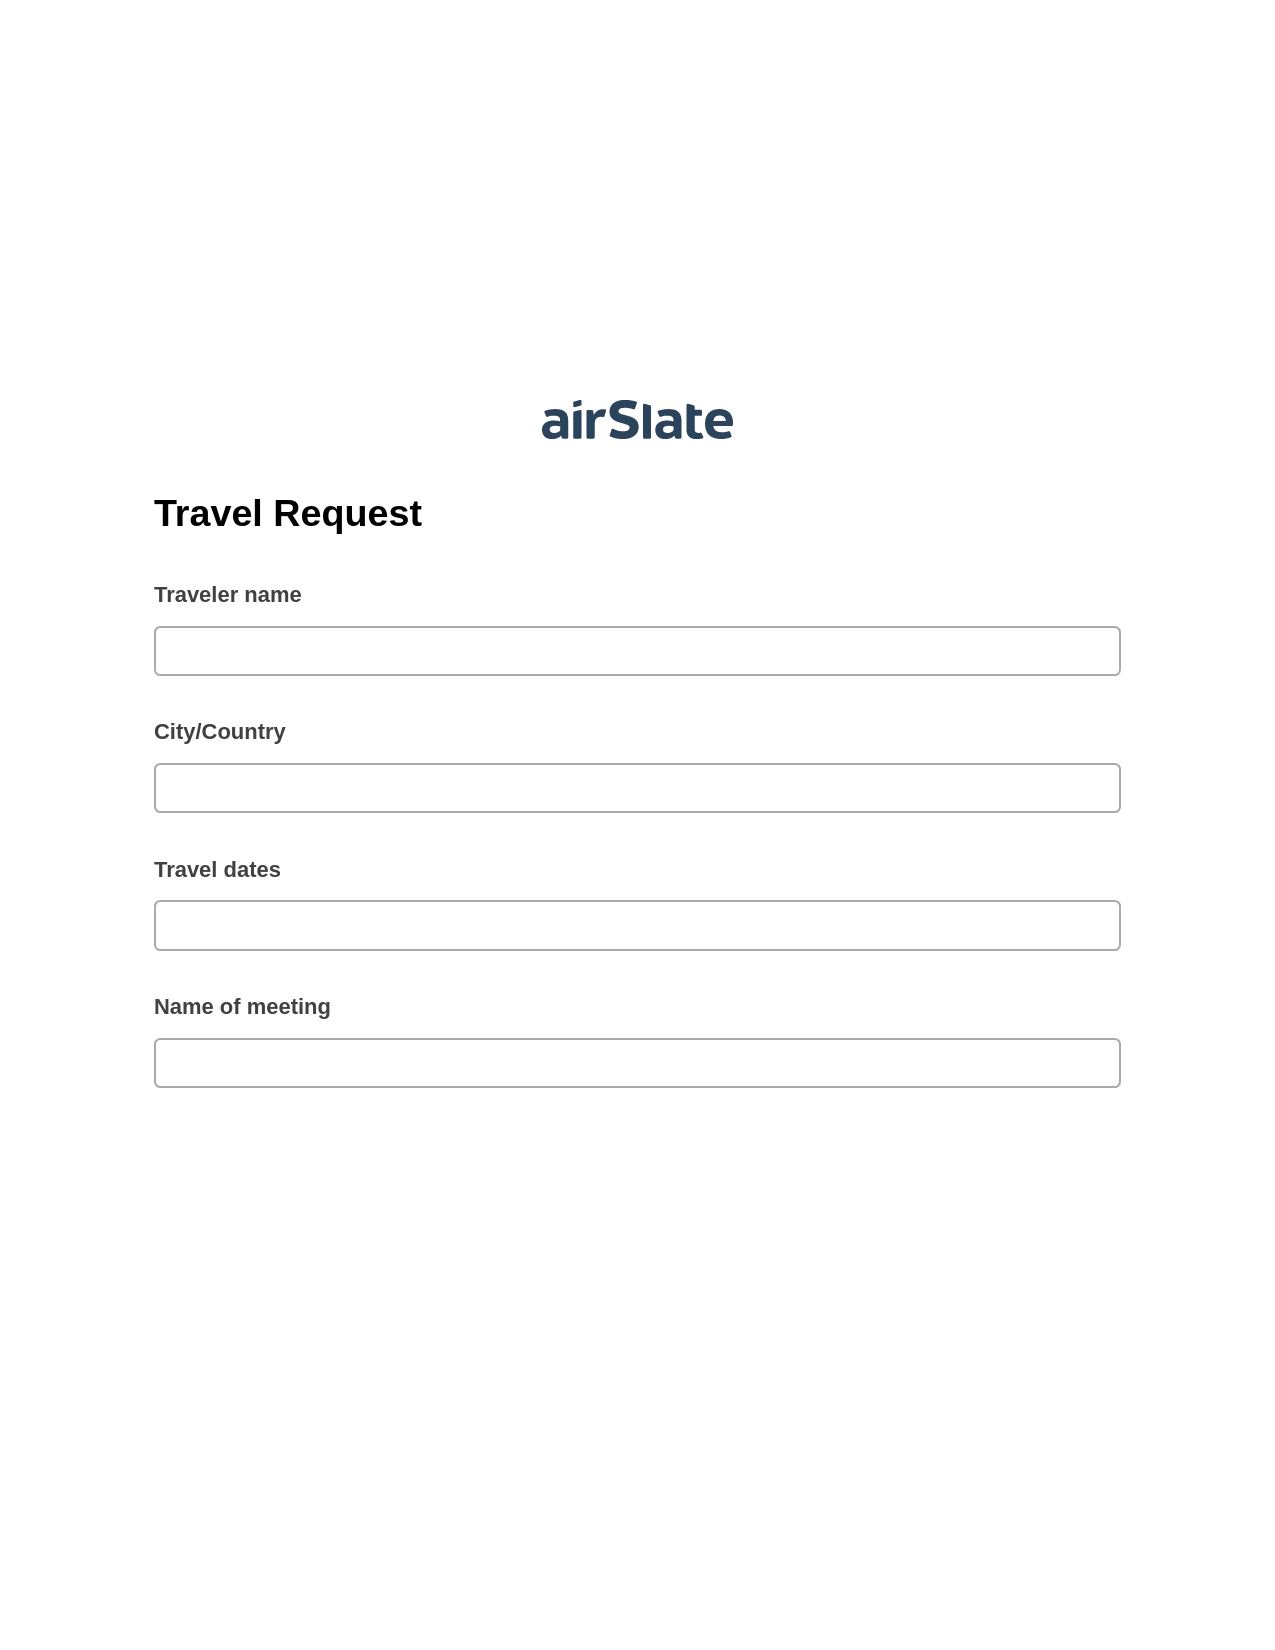 Travel Request Pre-fill Slate from MS Dynamics 365 Records Bot, Create Slate Reminder Bot, Post-finish Document Bot